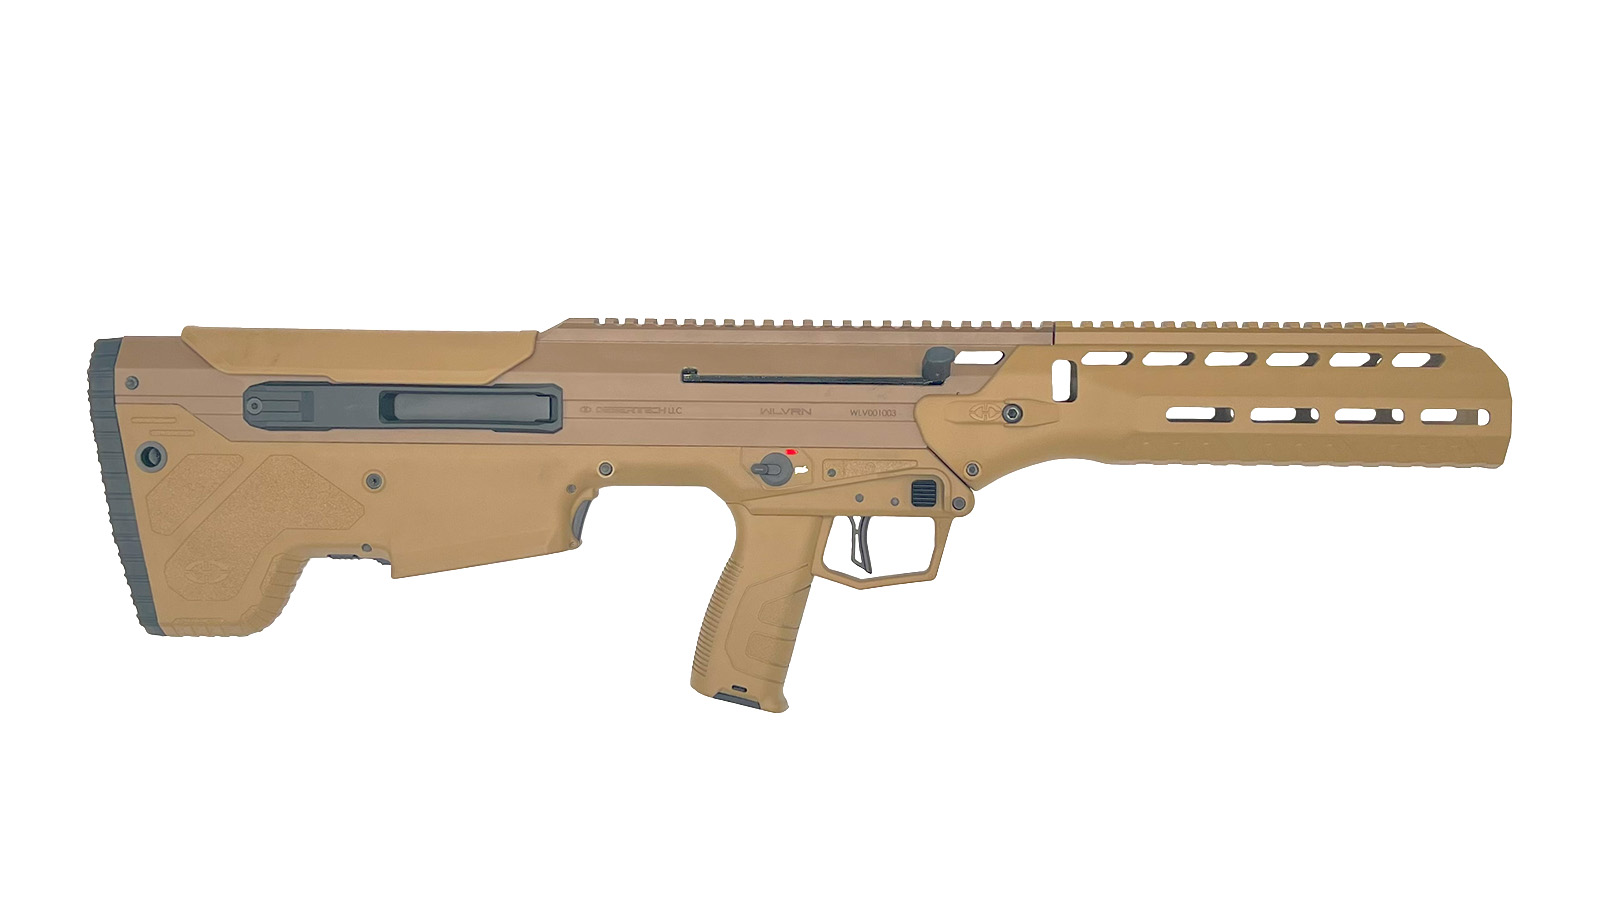 WLVRN Chassis, California FDE